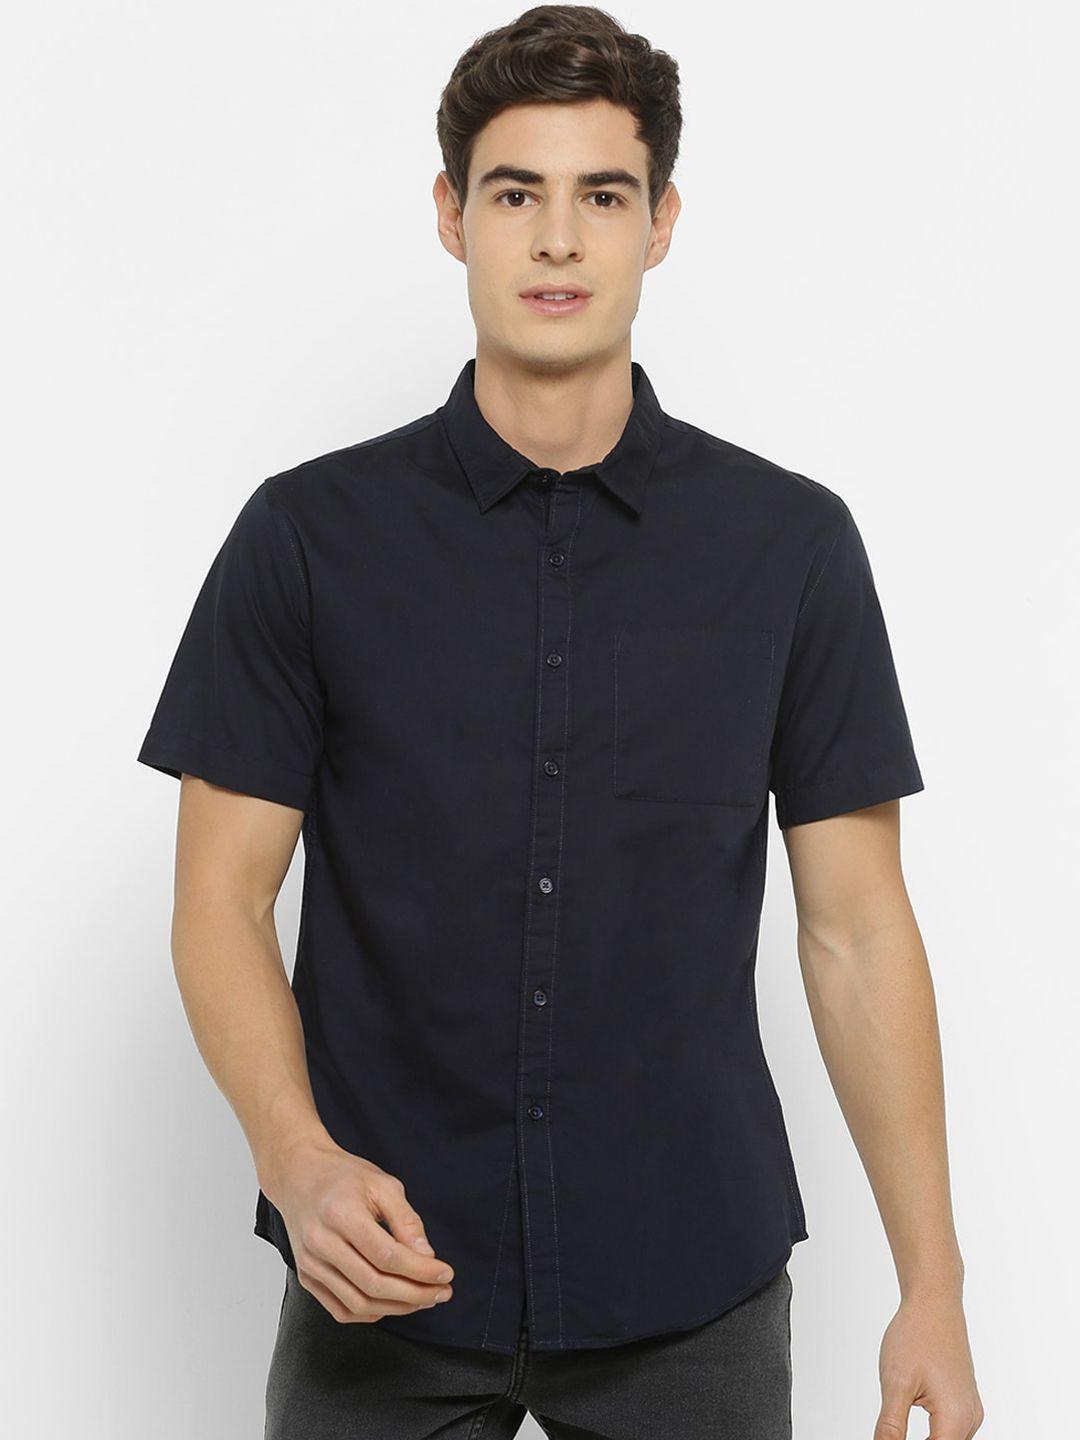 forever-21-men-navy-blue-slim-fit-solid-casual-shirt